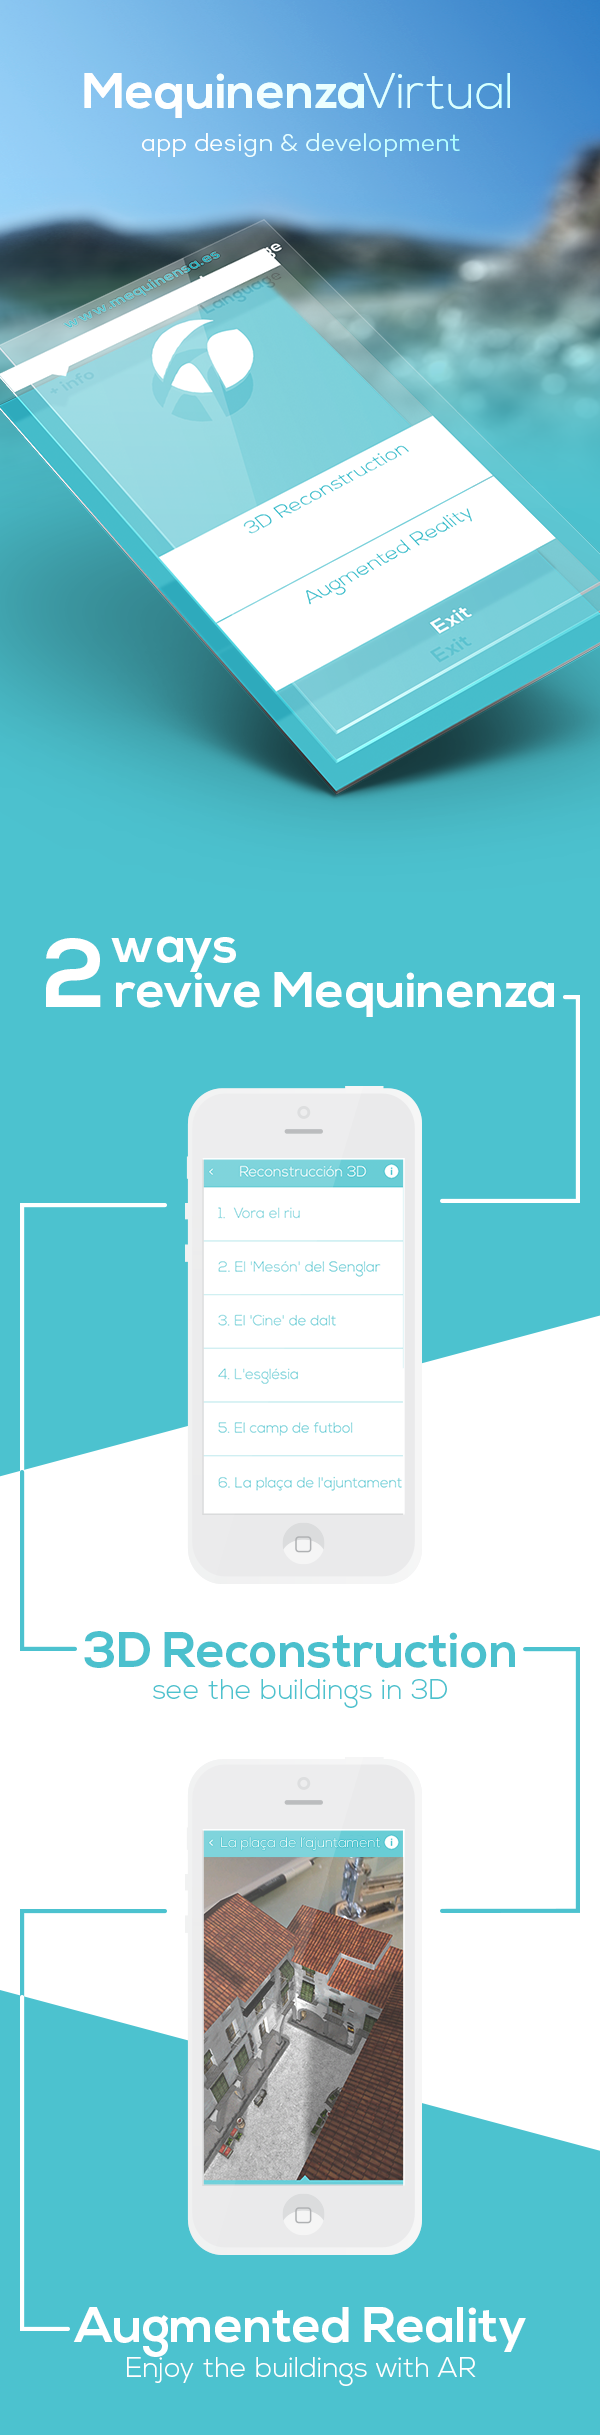 RA AR augmented reality Mequinenza app museum